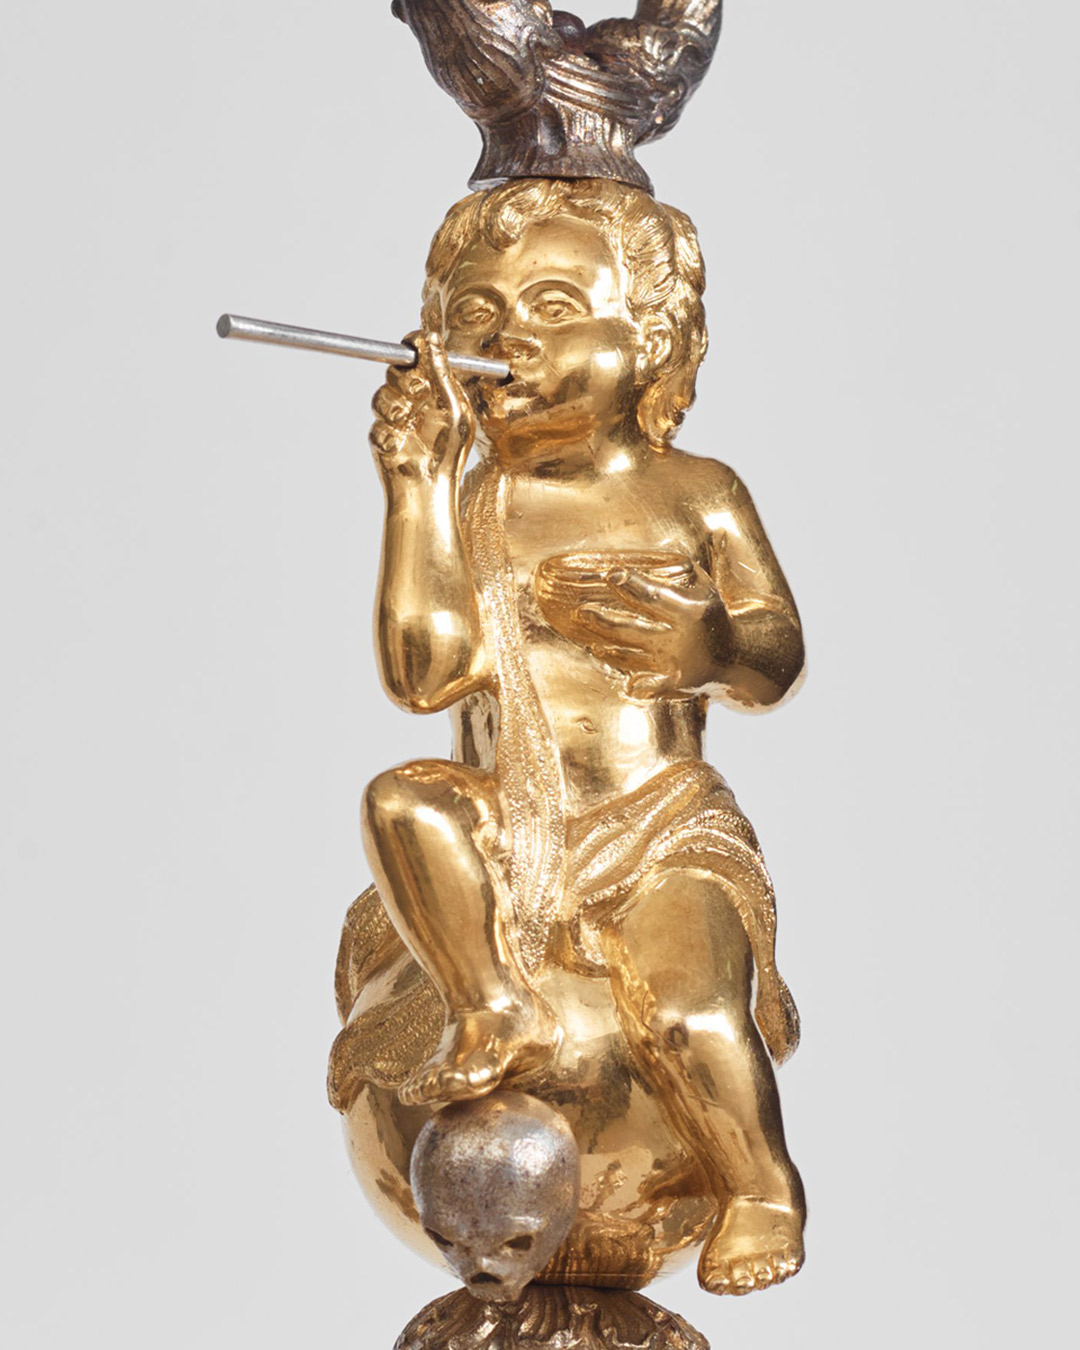 Carl Edberg's characteristic putto blowing soap bubbles, elegantly chiselled on the masterpiece.